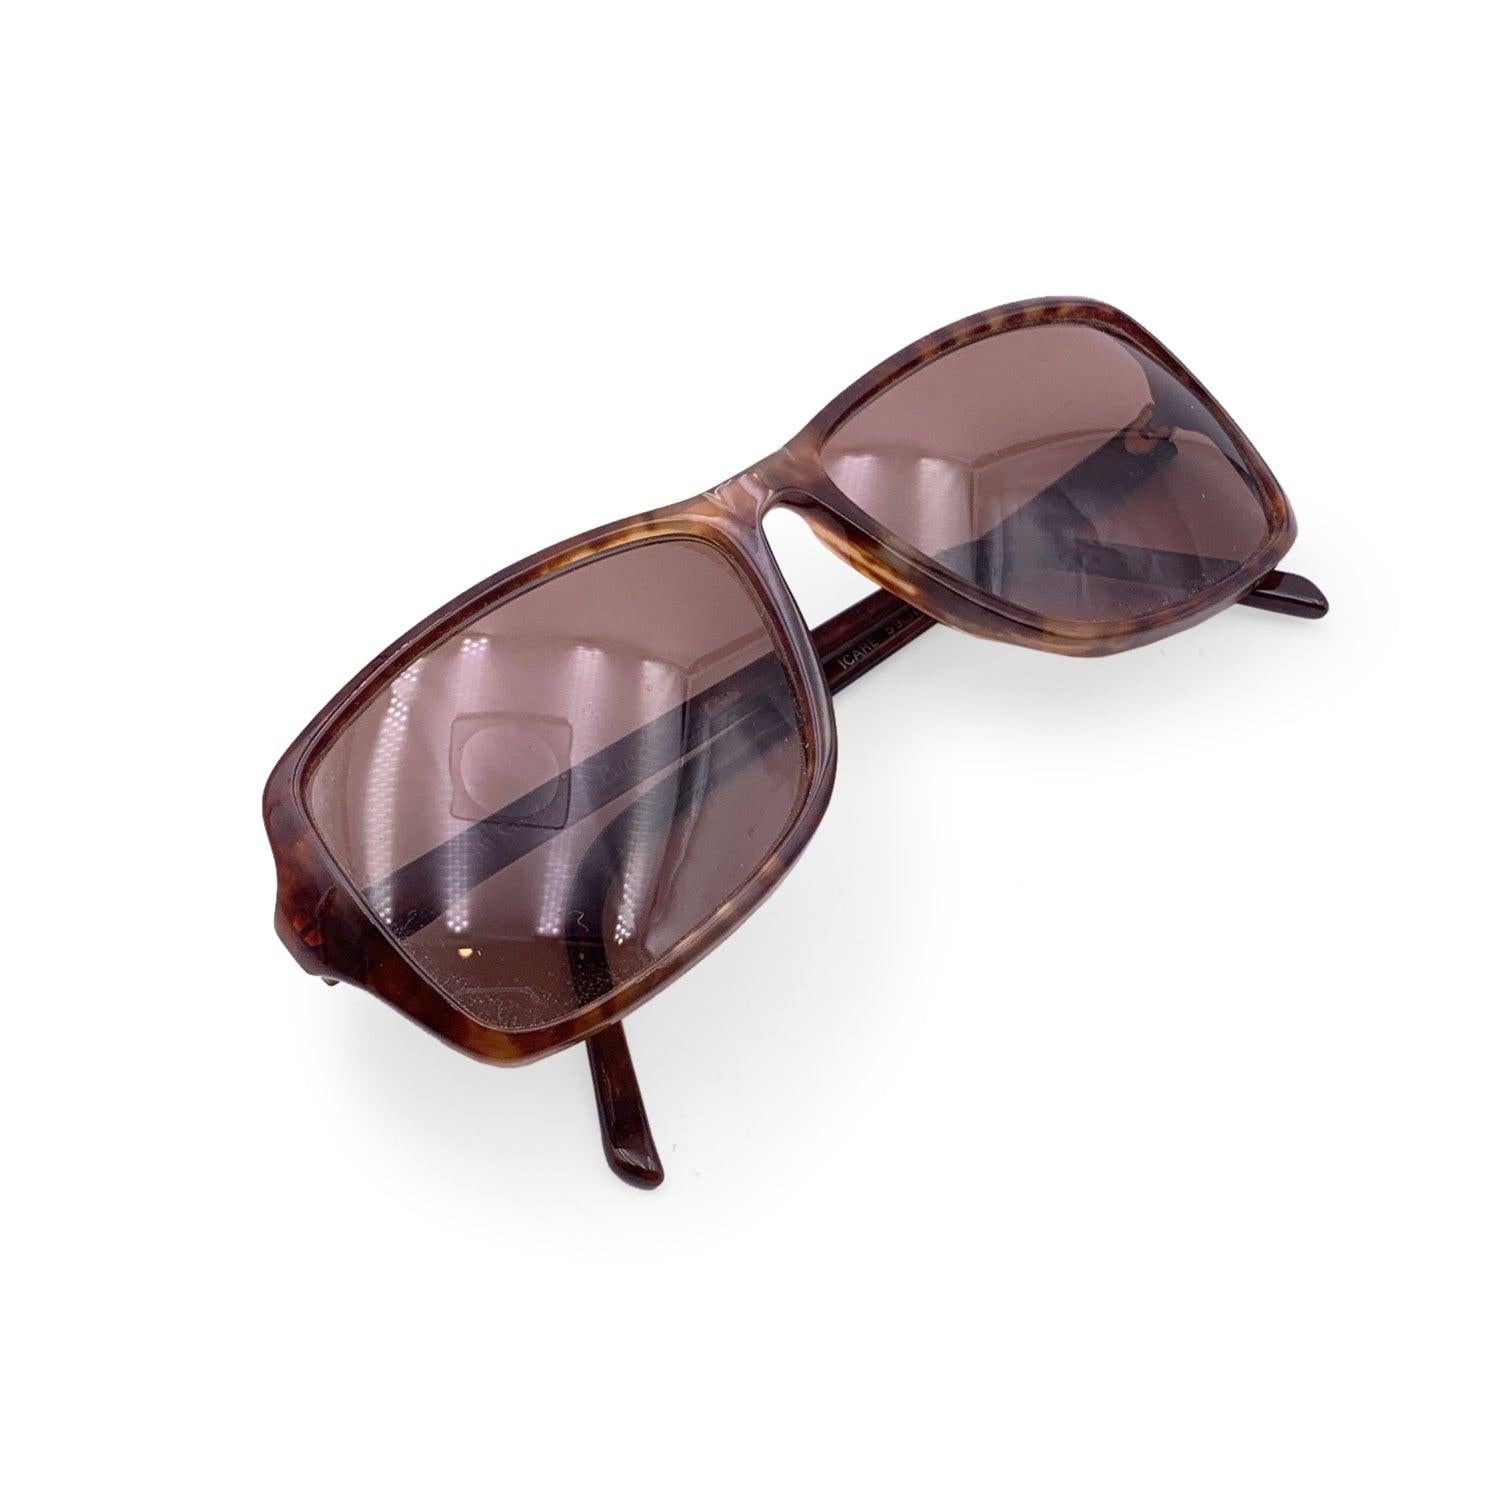 Yves Saint Laurent Vintage Brown Mint Unisex Sunglasses Icare 59mm In Excellent Condition For Sale In Rome, Rome